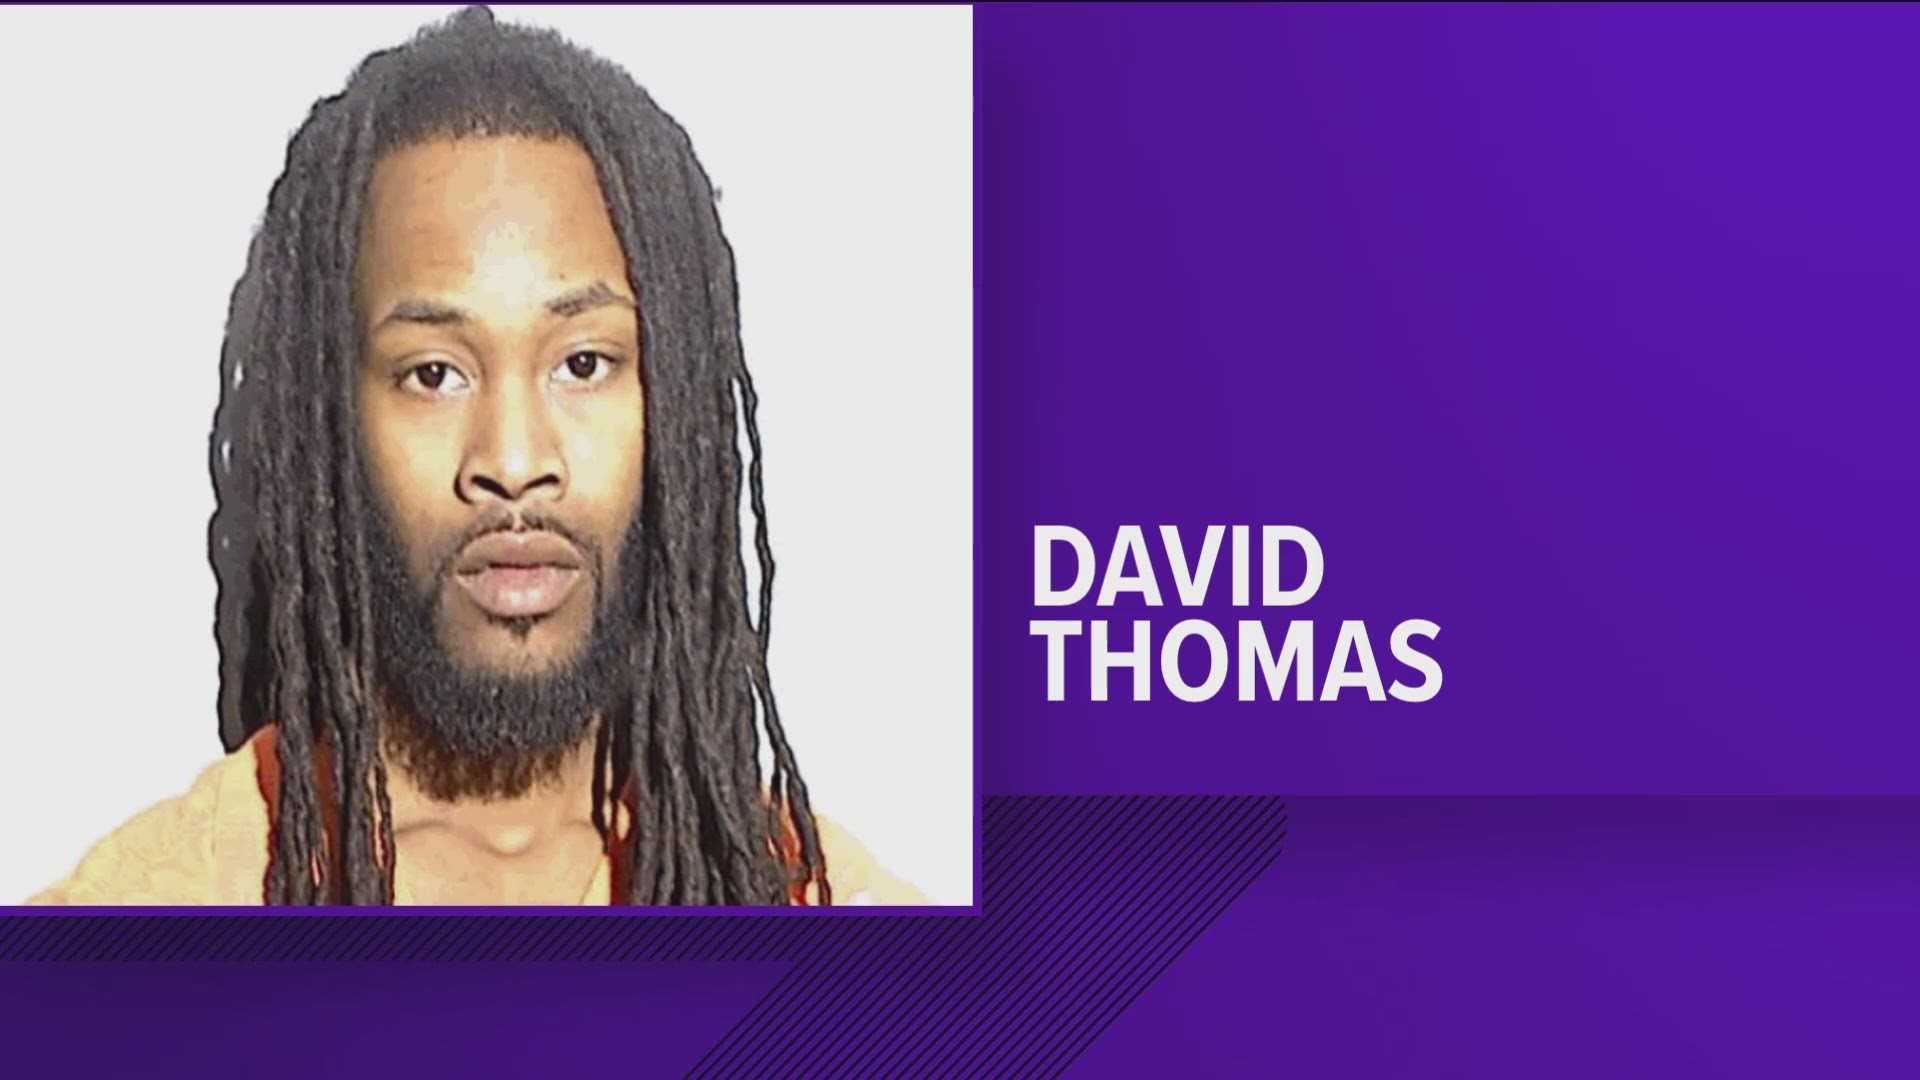 According to court documents, 30-year-old David Thomas is charged with aggravated arson and felonious assault.